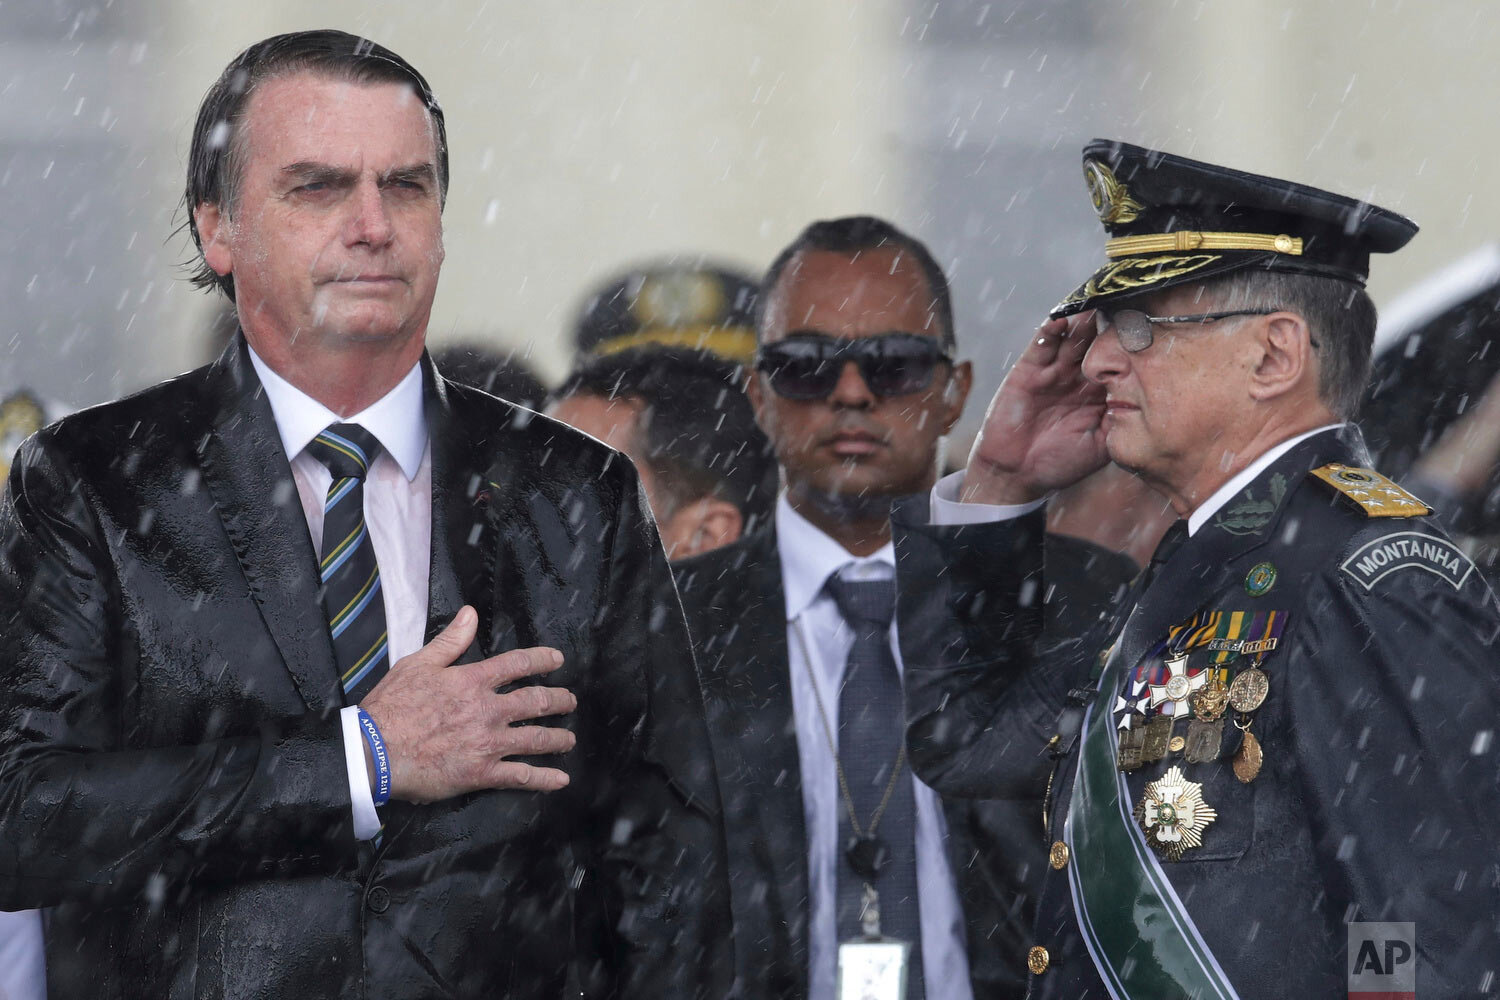  Brazil's President Jair Bolsonaro puts his hand over his heart as Army Commander Edson Leal Pujol salutes during the playing of the national anthem at a ceremony marking Army Day, in Brasilia, Brazil, on April 17, 2019. Brazil's Army Day is official